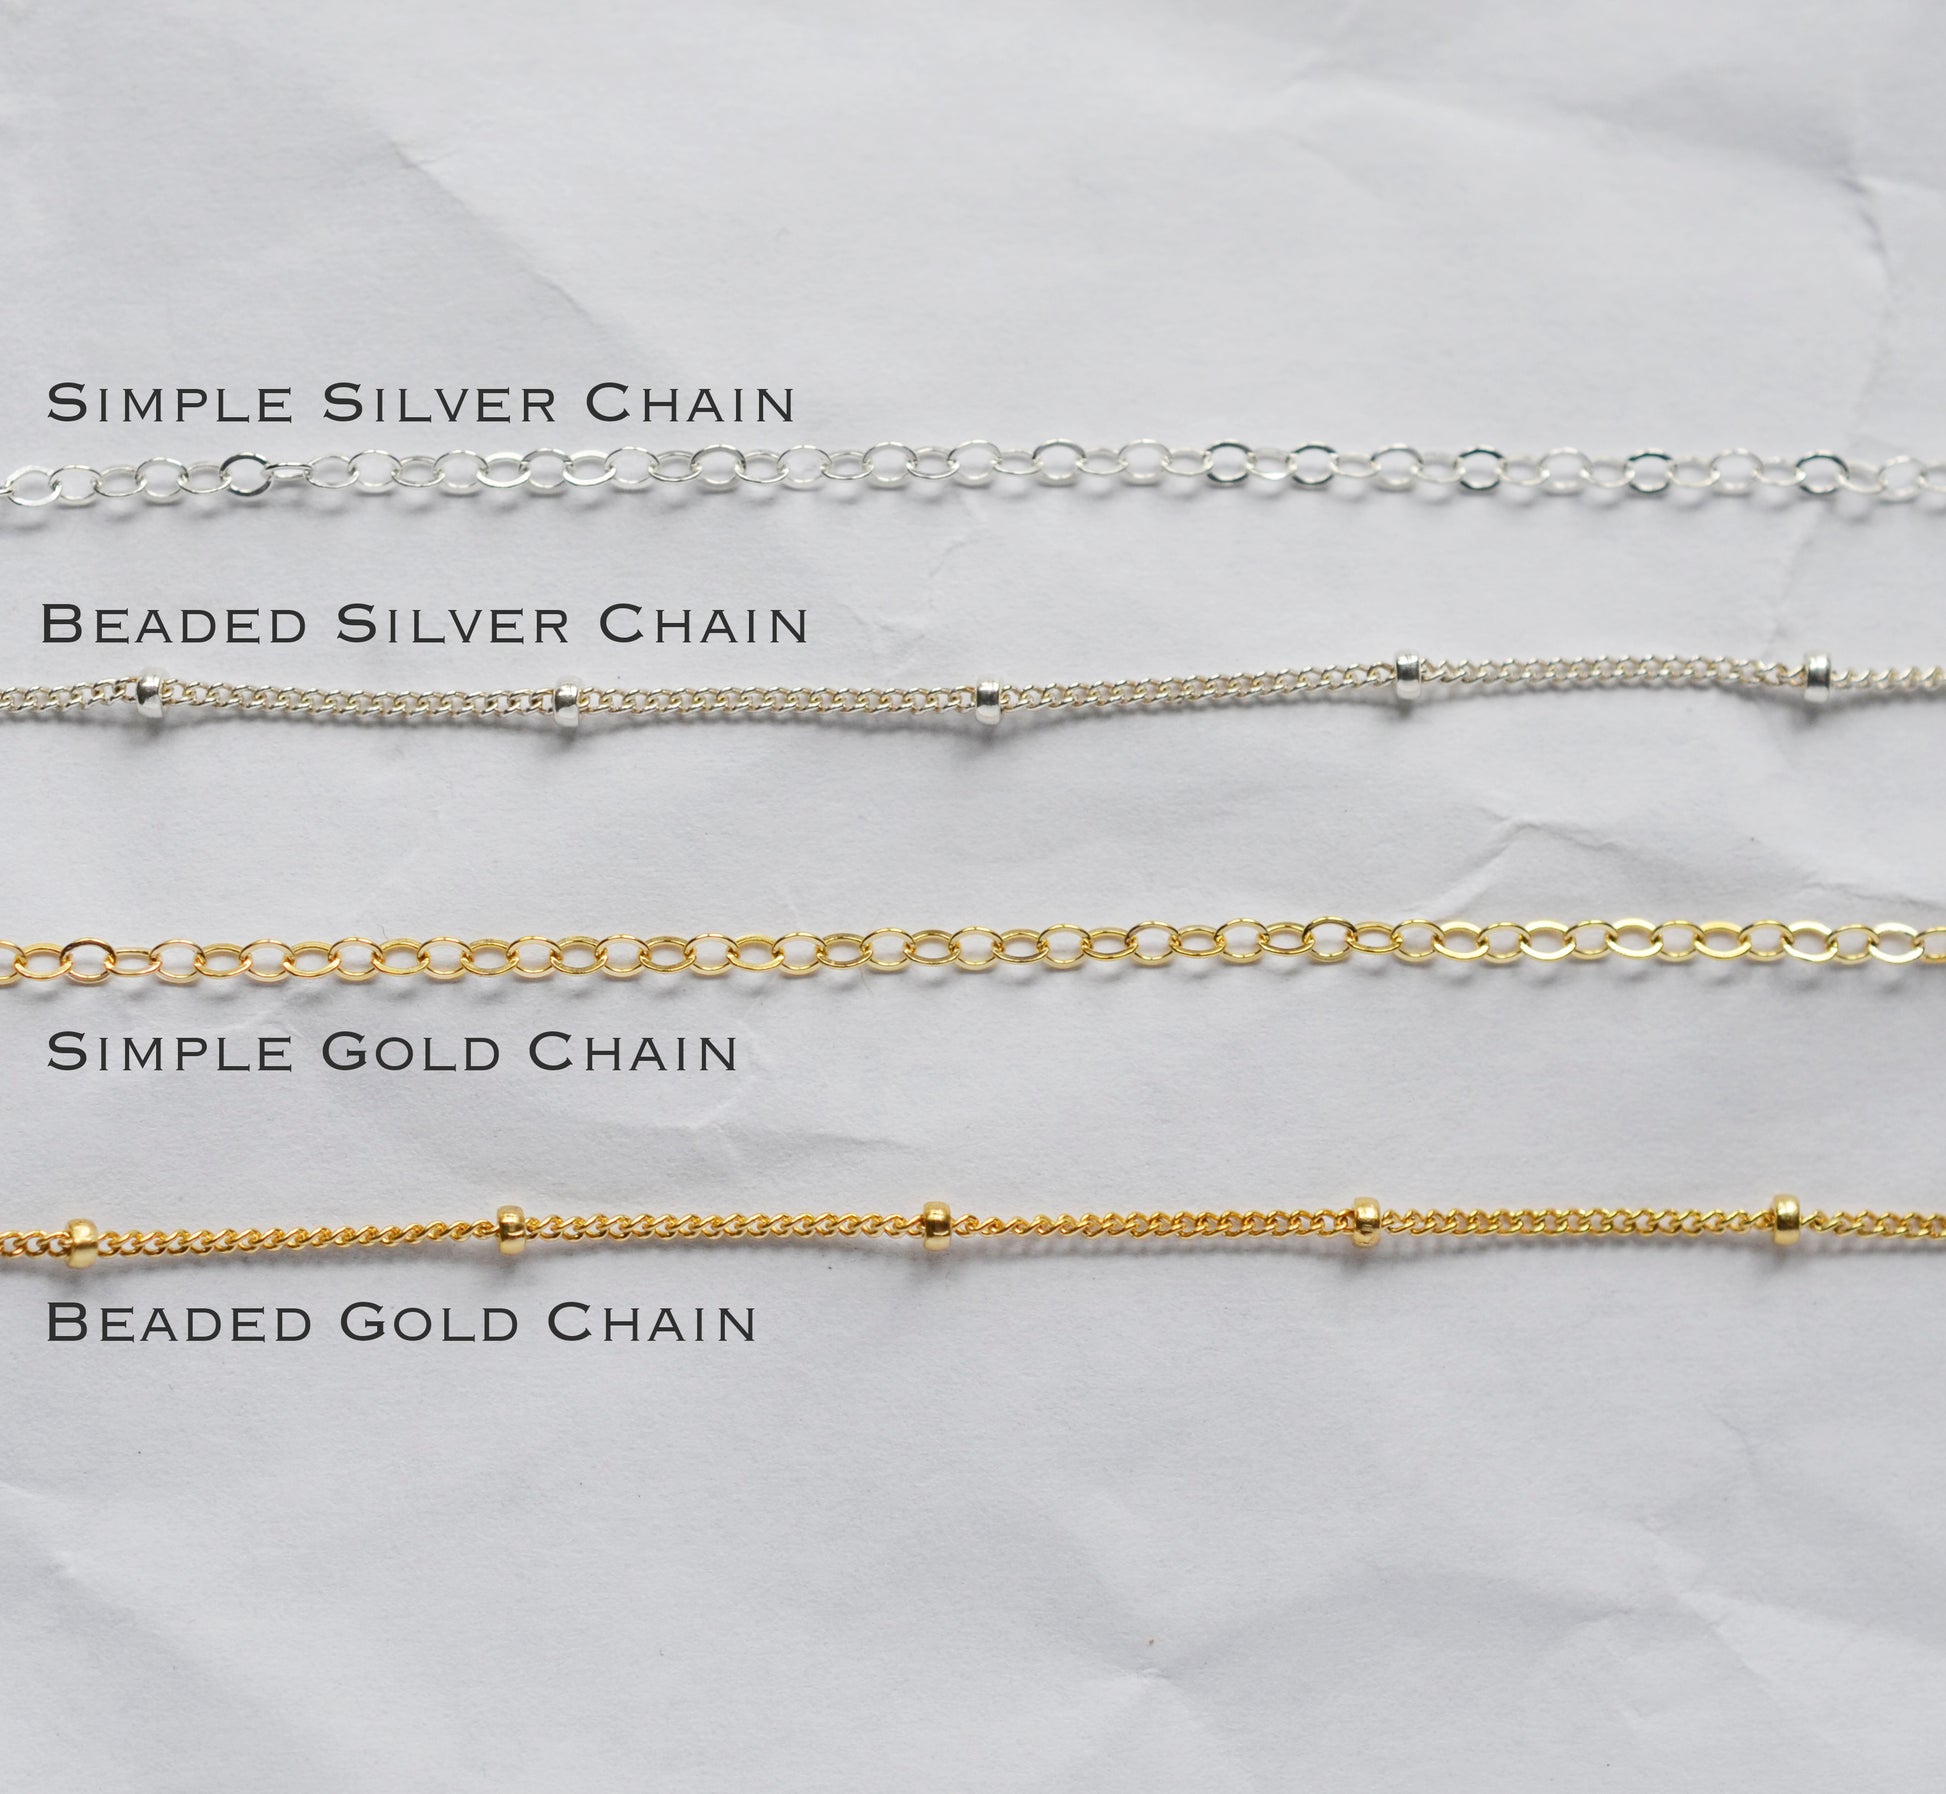 Chain options for the necklace. A simple chain is a cable chain. The beaded chain has small beads dotting the chain.